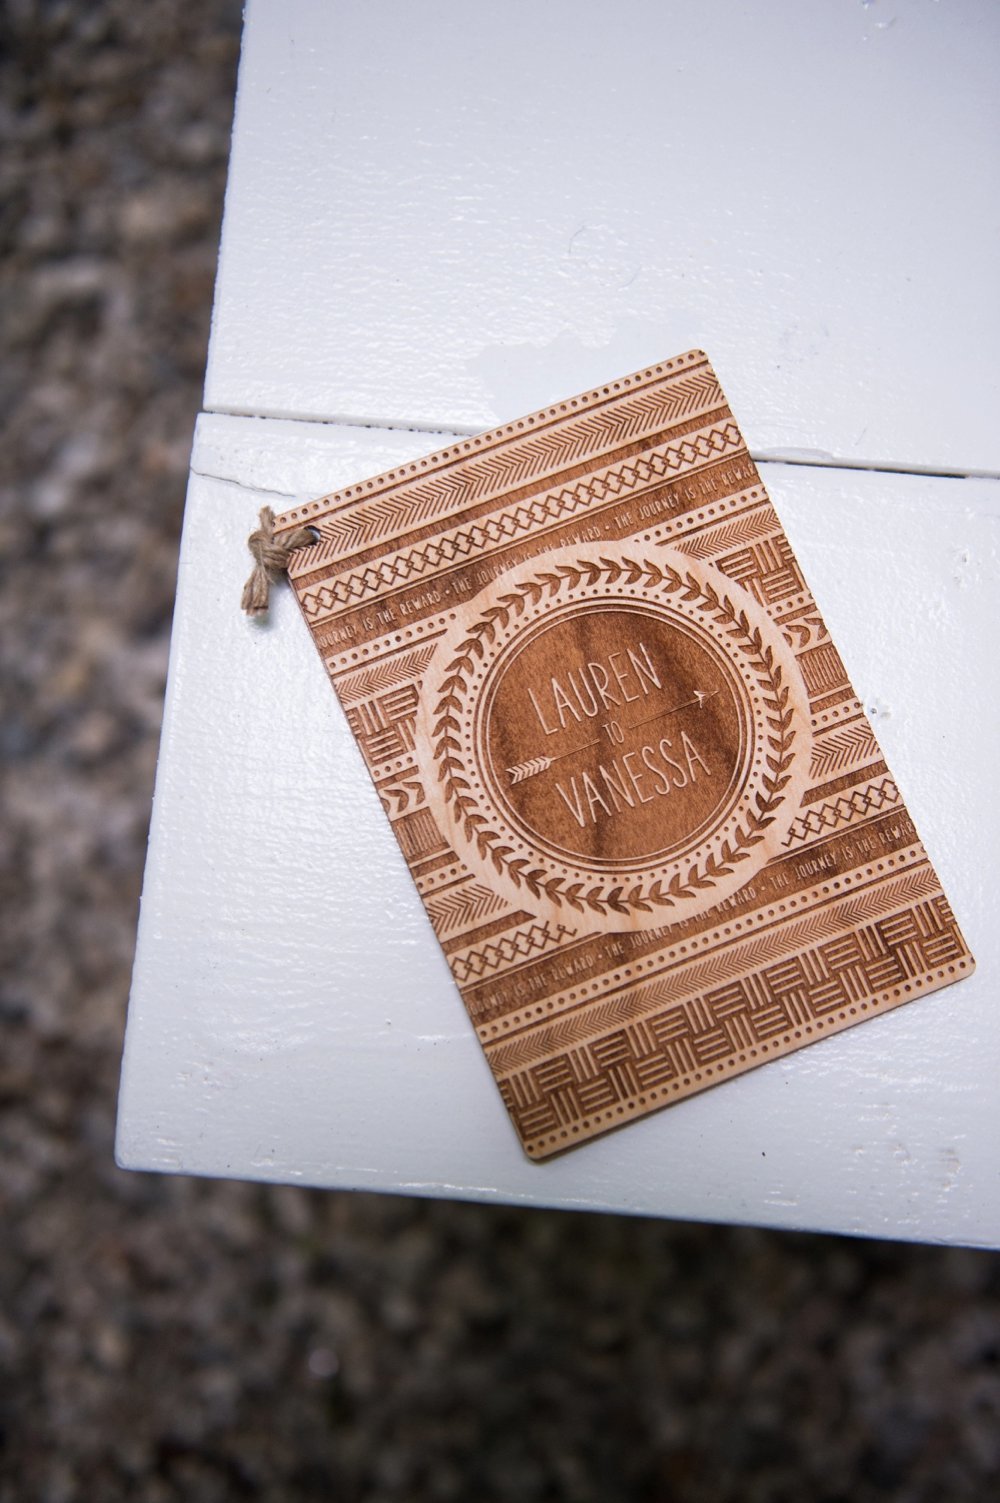 Wooden wedding ceremony program for Rustic same-sex wedding at The Barn at Walnut Hill in Maine